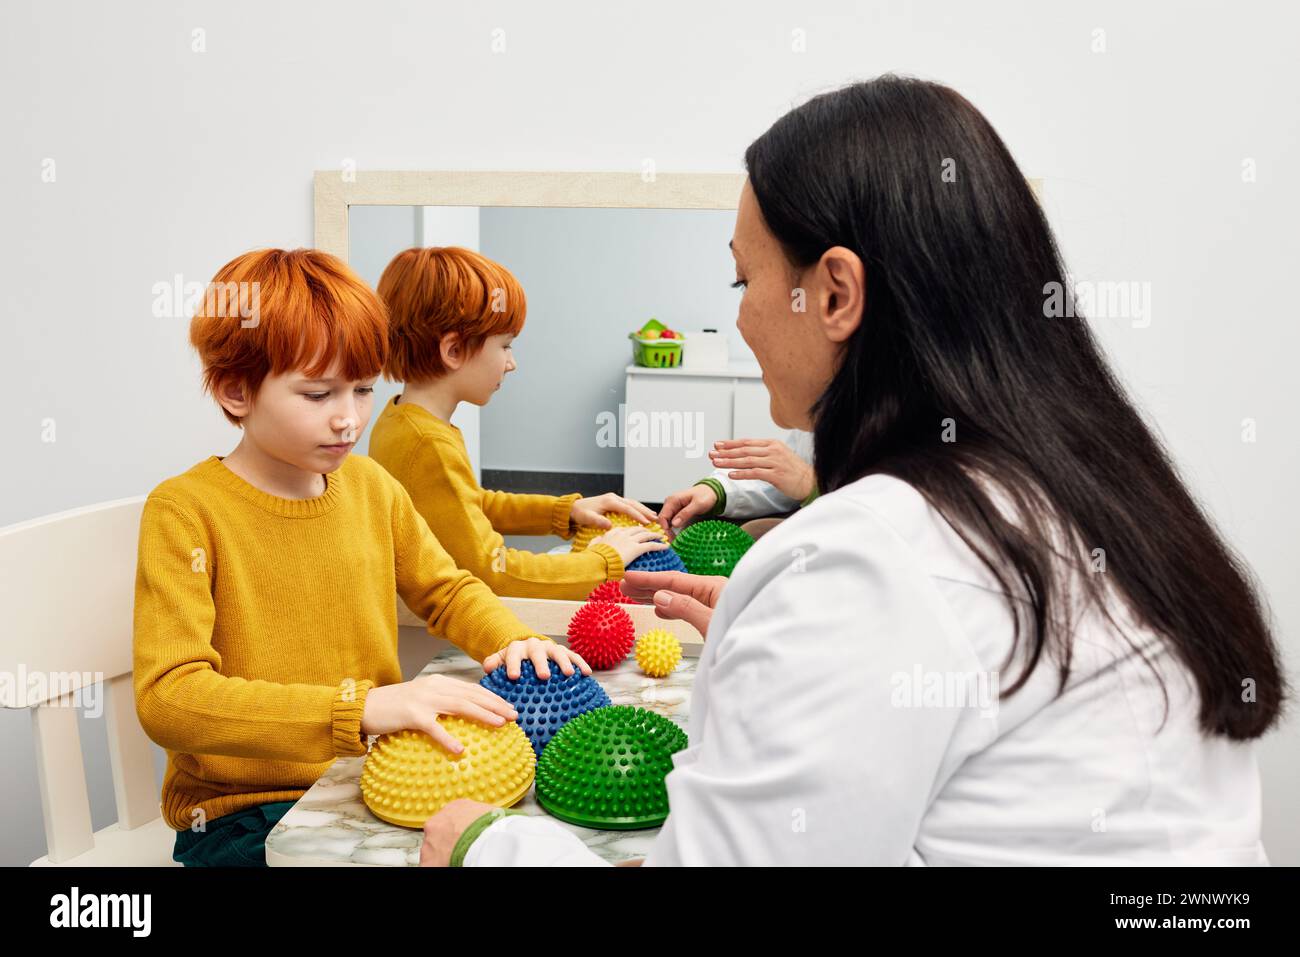 Occupational therapist using sensory integration therapy to improve sensory processing for male child patient. doctor using hedgehog half balls to dev Stock Photo